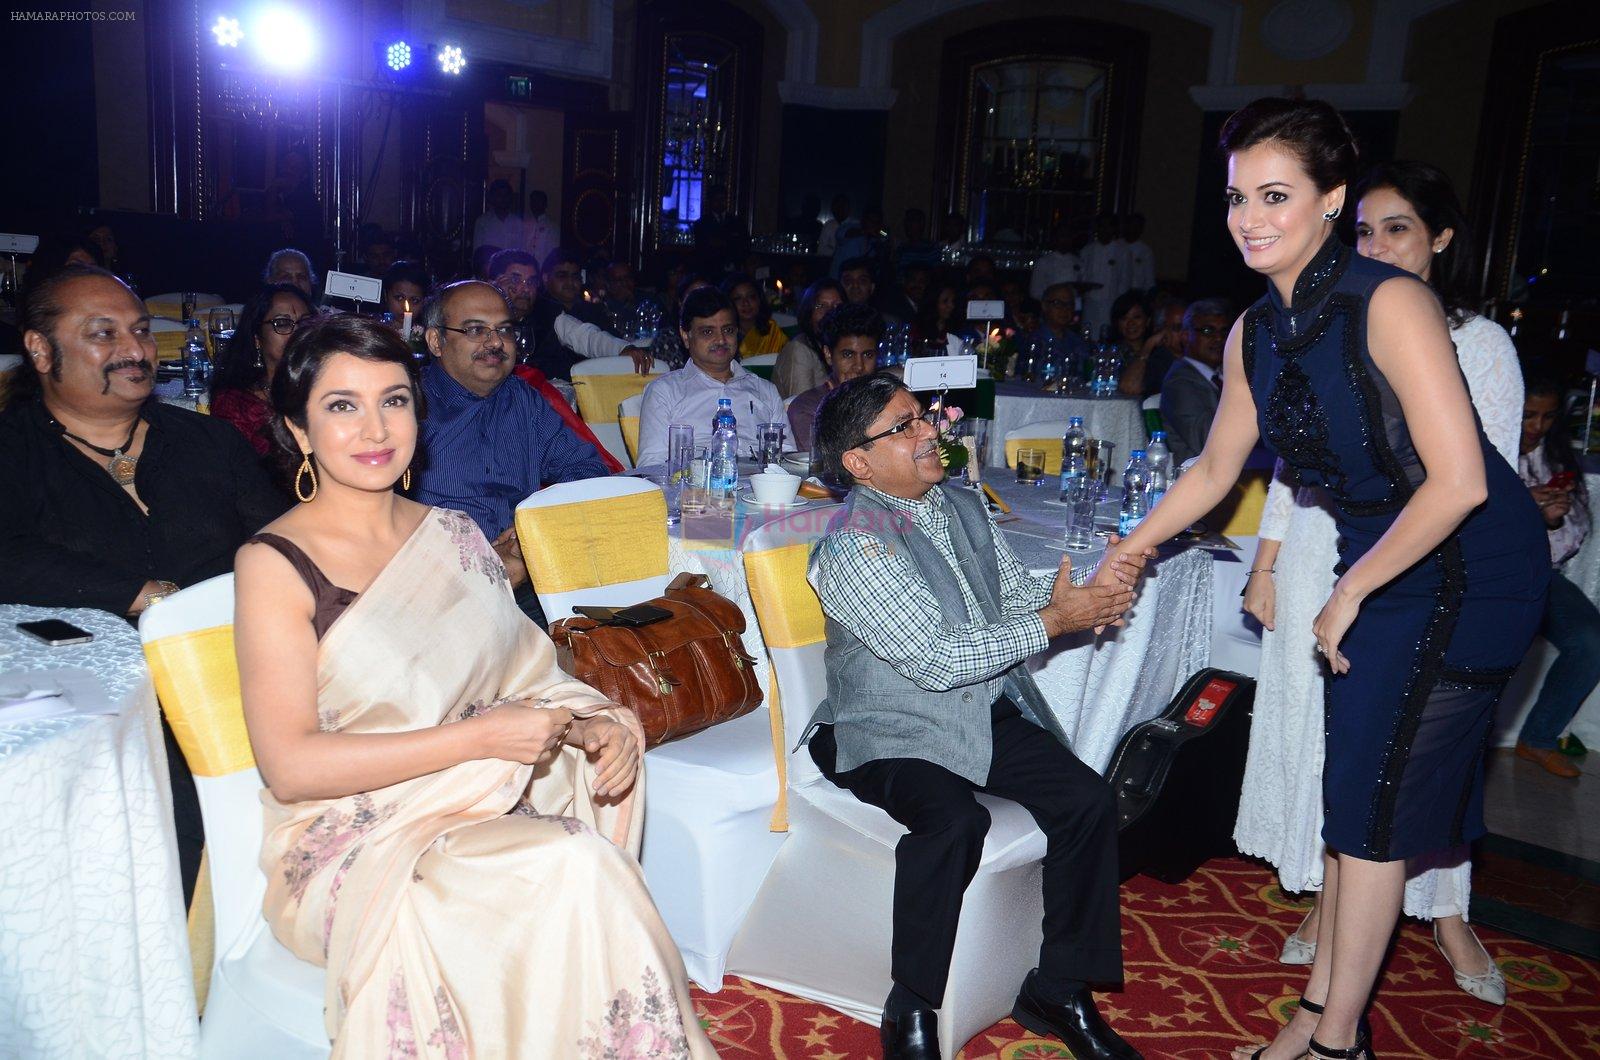 Tisca Chopra, Dia Mirza during the event organised by Genesis Foundation in Mumbai, India on June 11, 2016